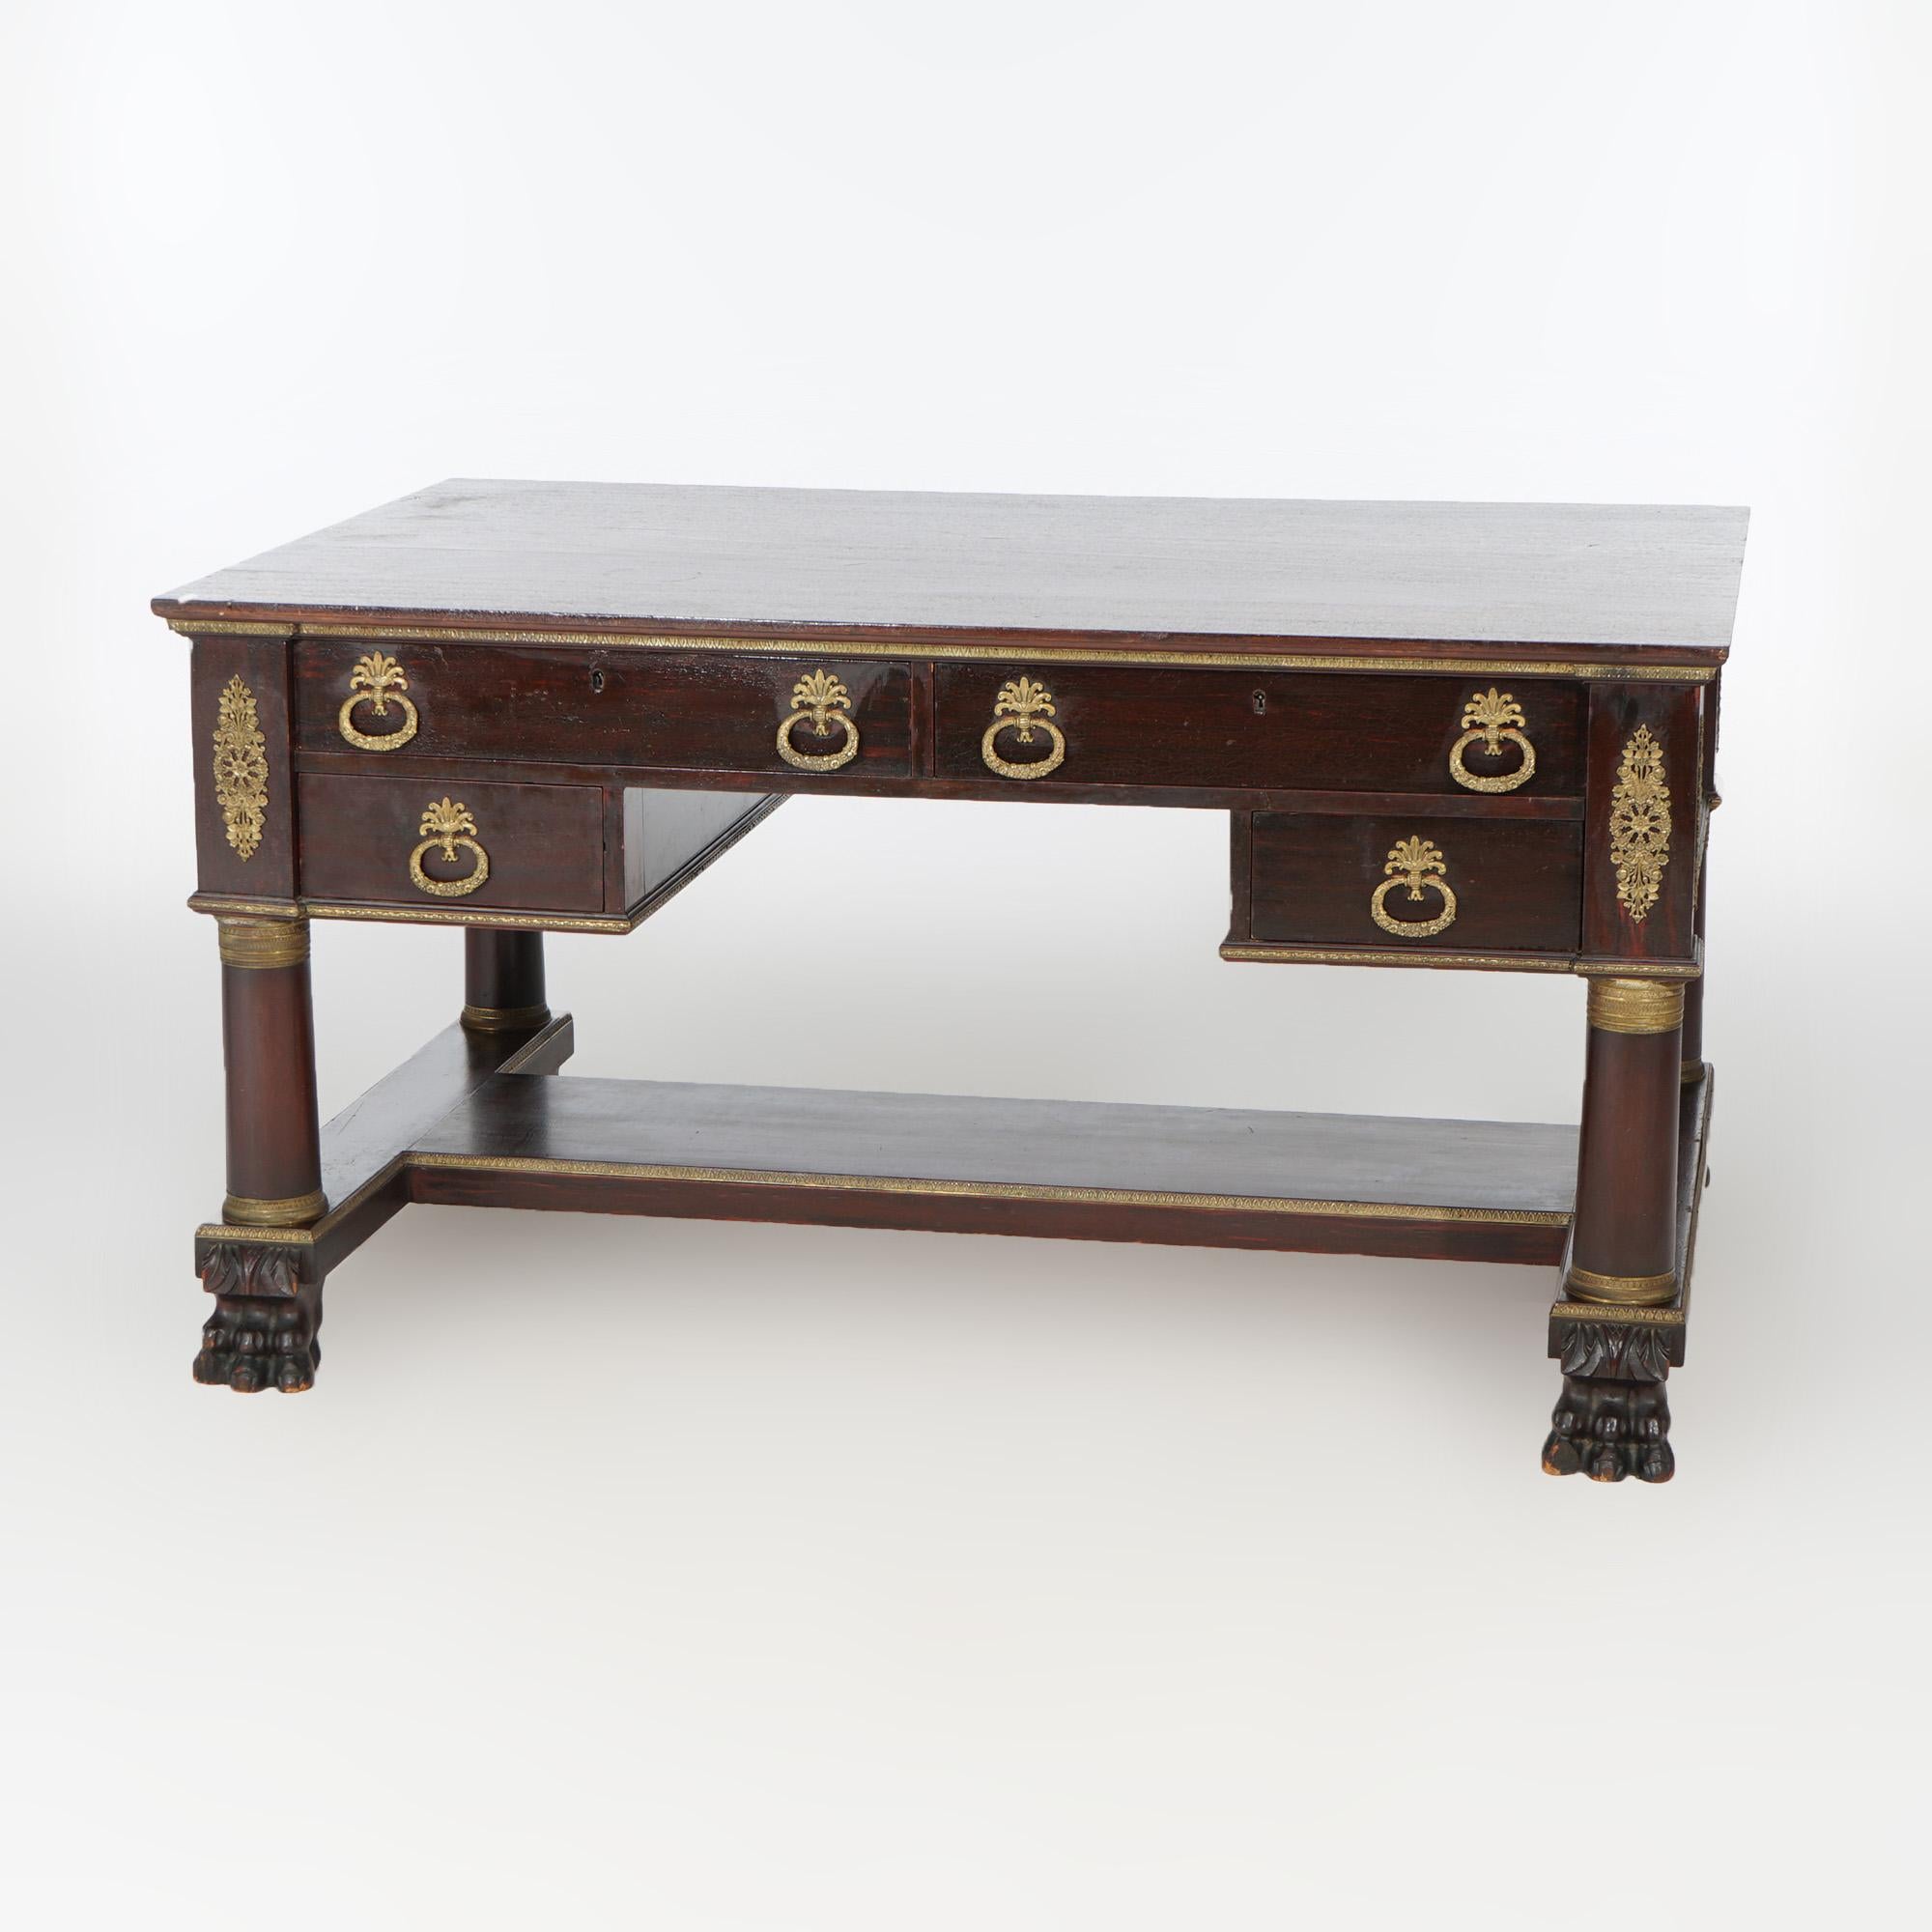 An American Empire Classical Greco partners desk offers flame mahogany construction with double sided full case having drawers and flanking full column supports, raised on carved paw feet, cast ormolu mounts throughout, c1880

Measures - 28.5